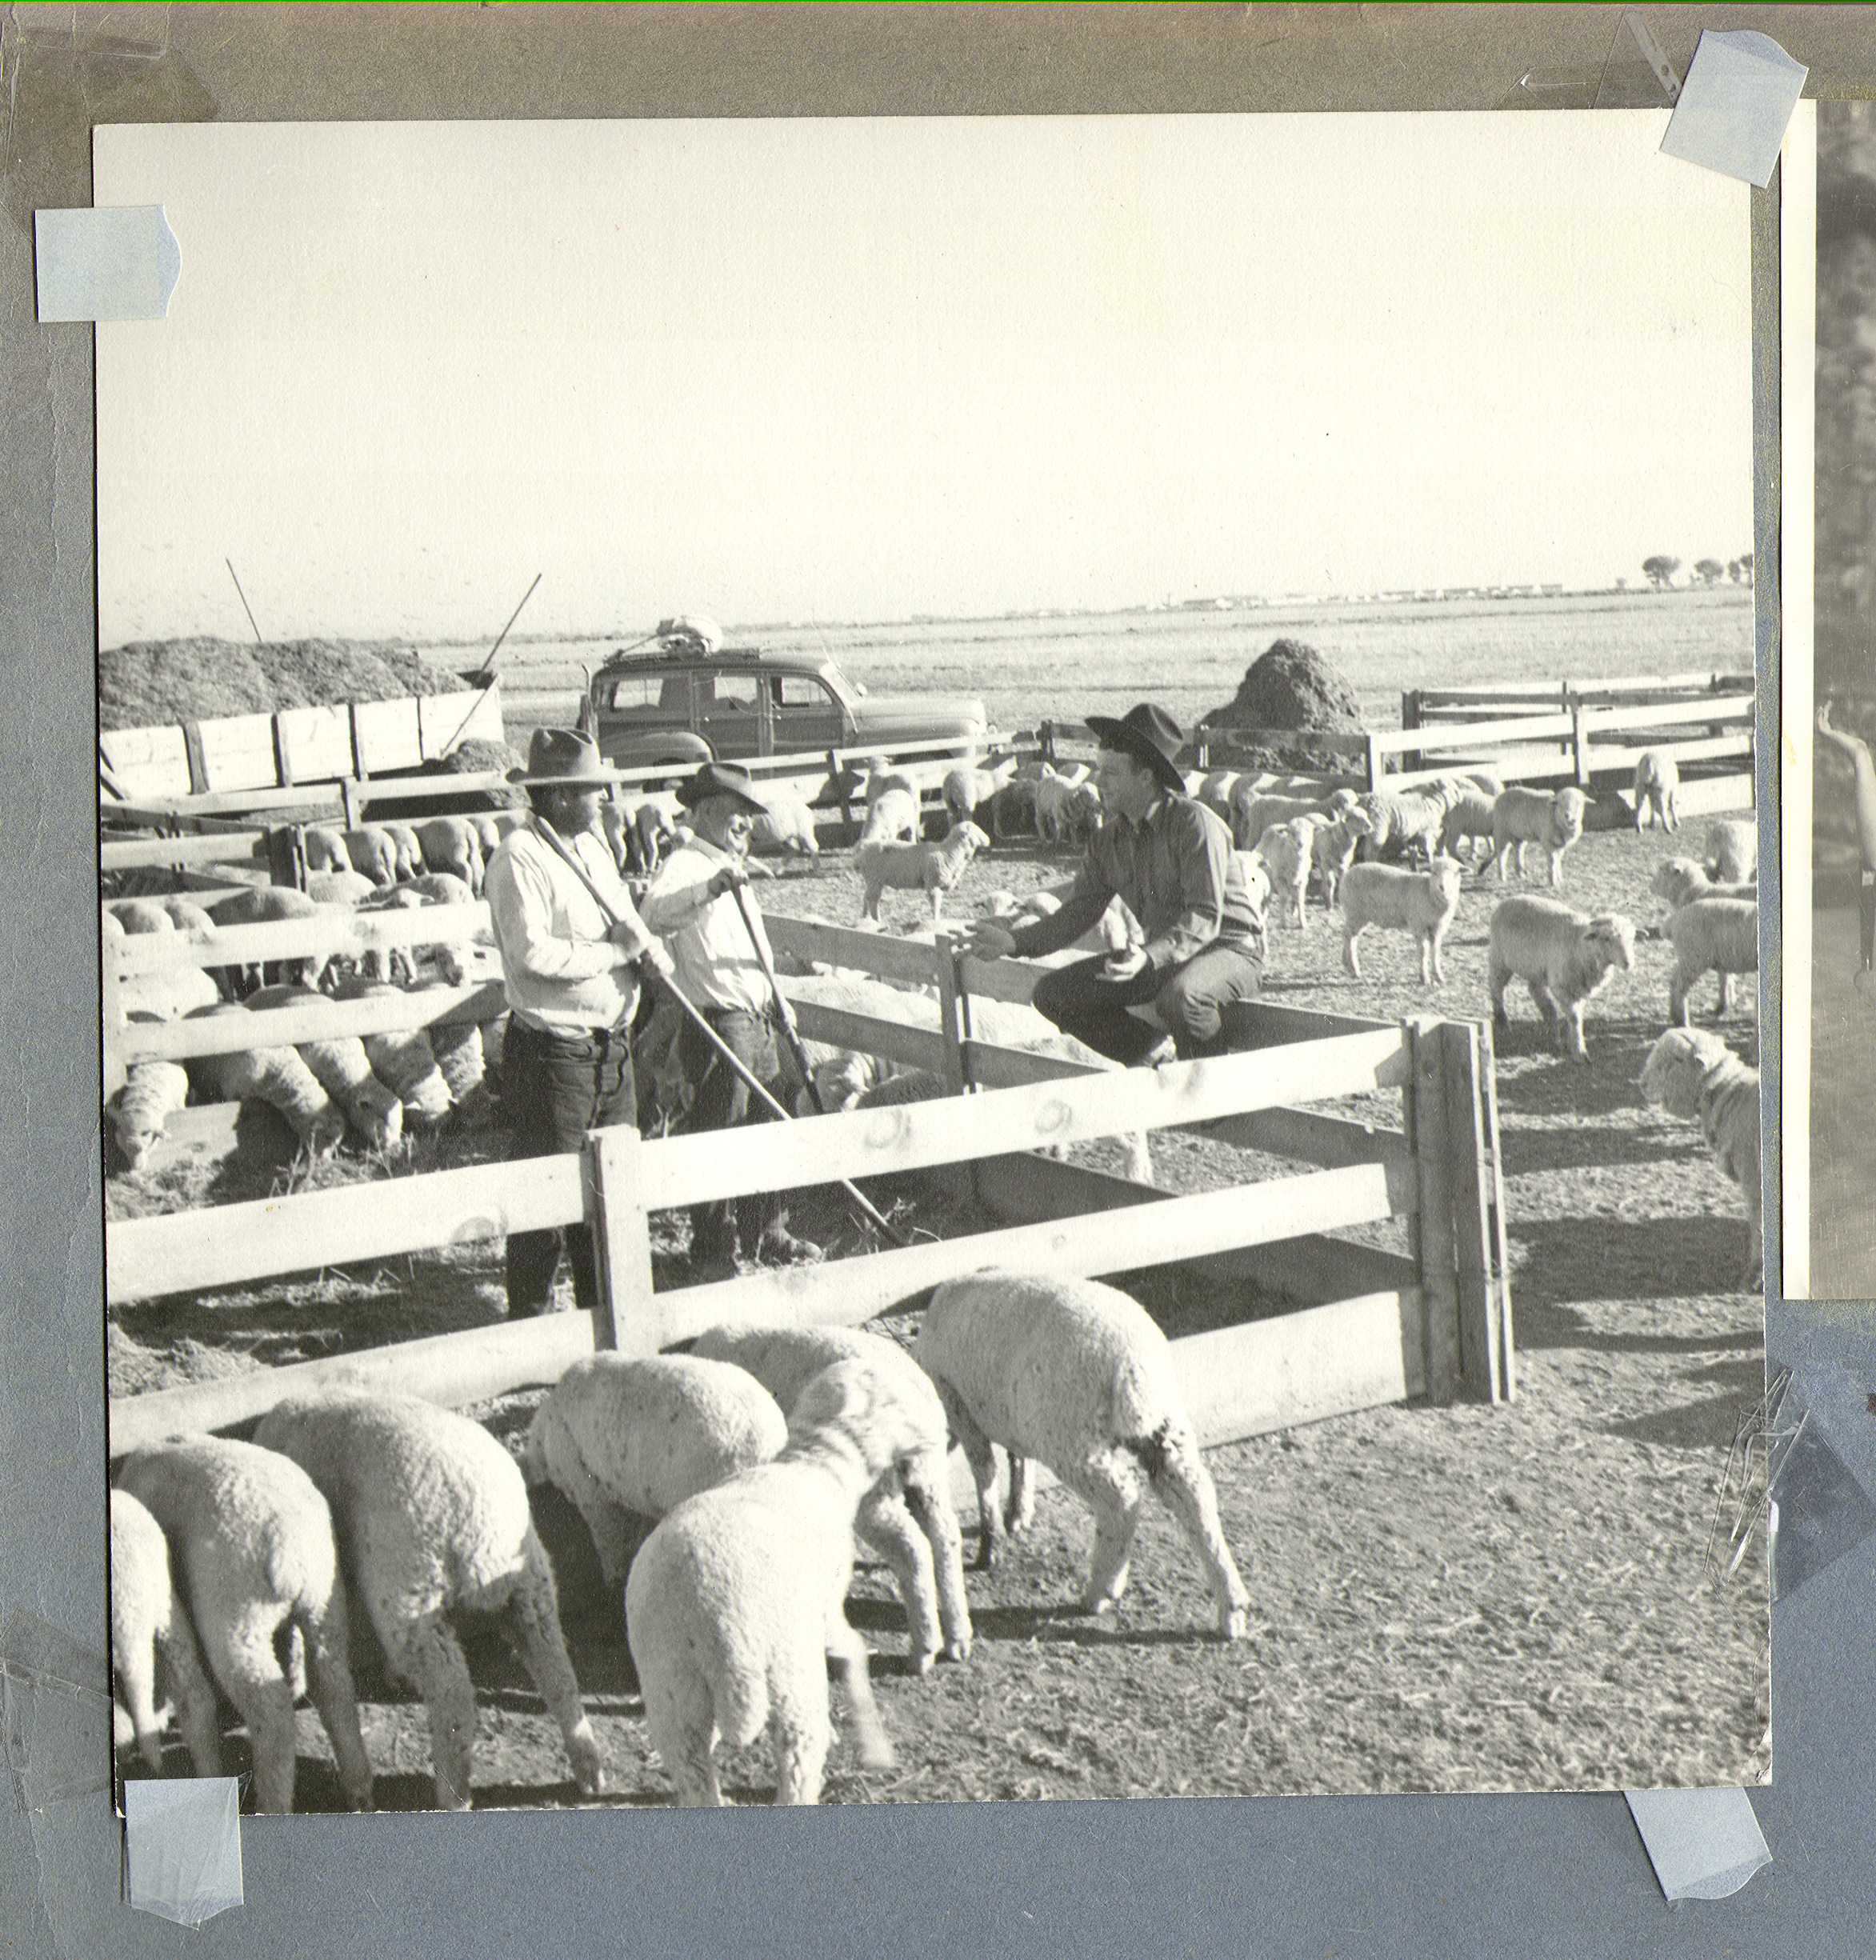 Rex Bell sitting on the fence. Two ranch hands also pictured along with sheep in the corral on the ran ch